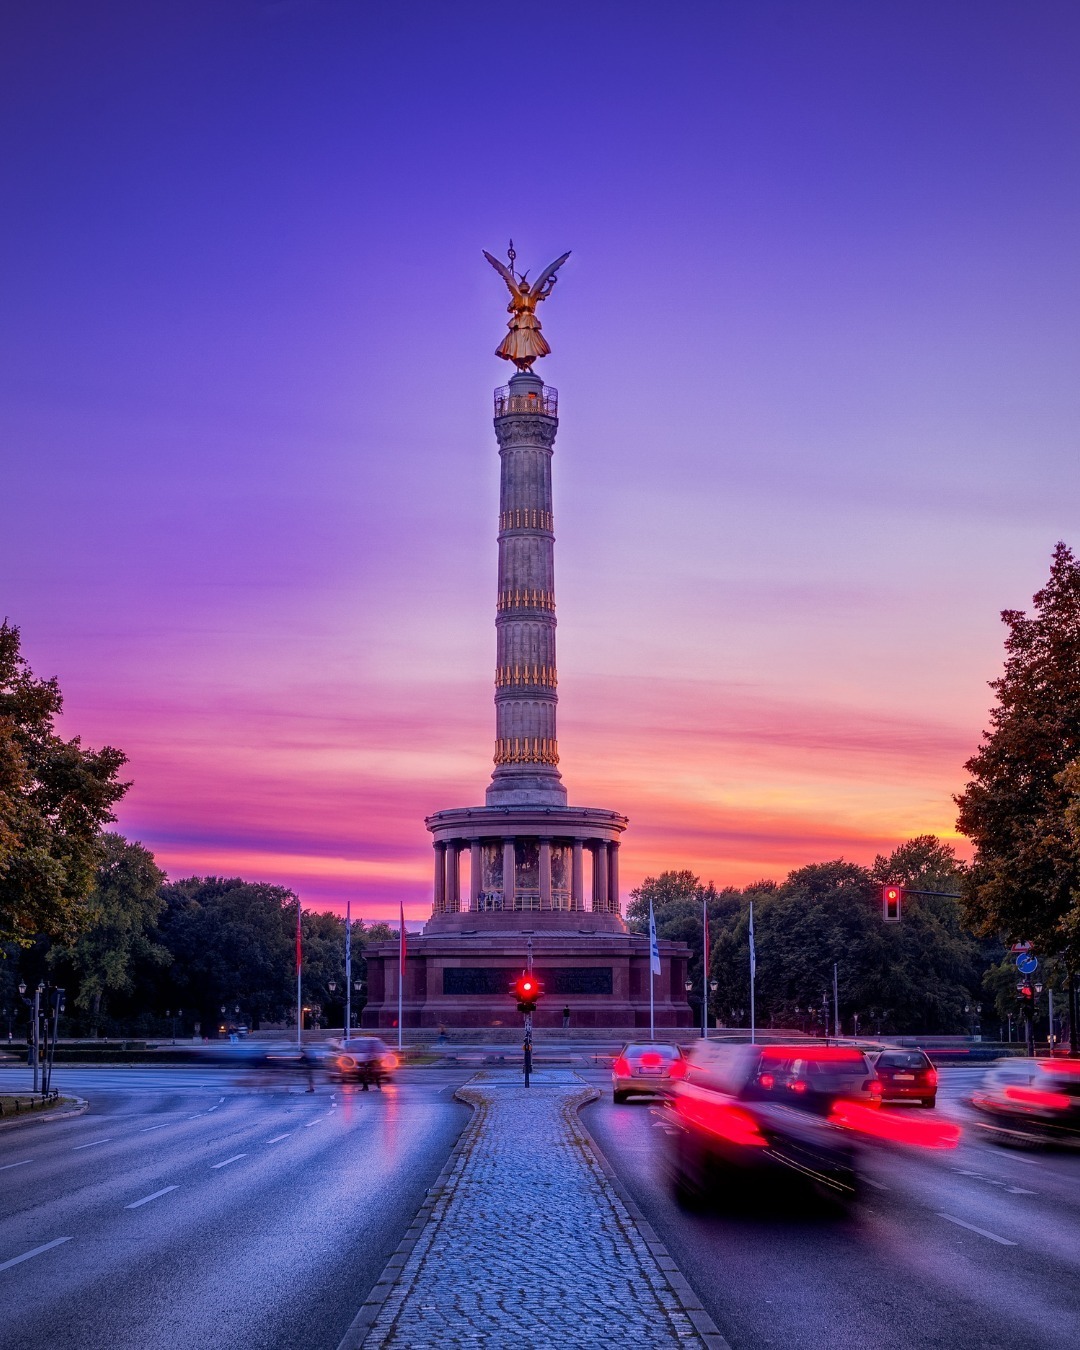 Of course, you can explore the German capital as part of a longer European or even German holiday. But to get to know the city, a dedicated city trip to Berlin is the way to go.

We can help you decide on your itinerary for your Berlin city trip as we answer some questions to consider when planning your trip.

🤔 How long to stay in Berlin?
For an exploration of Mitte, the city centre, 2-3 days are recommended, while a week is ideal if you also want to see wider areas like Kreuzberg and Friedrichshain.

Shorter visits can follow 24-hour or 48-hour itineraries, catering to various interests from history buffs to foodies.

🚌 How to get around in Berlin?
Public transportation is an option, but using City Sightseeing Berlin buses is more convenient, with stops at major sights and informative audio guides.

📖 Berlin highlights for different interests.
History Buffs: Visit Checkpoint Charlie, Berlin Wall Memorial, Neues Museum, Pergamon Museum, DDR Museum, German Spy Museum, and Jewish Museum for a mix of ancient and modern history.

Art Enthusiasts: Explore Jugendstil courtyards, Socialist Classicism buildings, Brandenburg Gate, Victory Tower, and Tiergarten statues. Museums like Neue Nationalgalerie, Berlinische Galerie, Alte Nationalgalerie, Kulturforum, Bode-Museum, and Hamburger Bahnhof showcase diverse art.

Berlin has something for every visitor. Whether you are visiting Berlin for the first time or have been here before, you will always find something to discover as the city keeps reinventing itself. 

Every season comes with a different attraction, such as the Christmas markets in winter, the food festivals in autumn, the blooming of nature in spring and the beer gardens in summer.

#citysightseeingberlin #berlin #visitberlin #germany #spring #thingstodoinberlin #whattodoinberlin #berlinmustdo